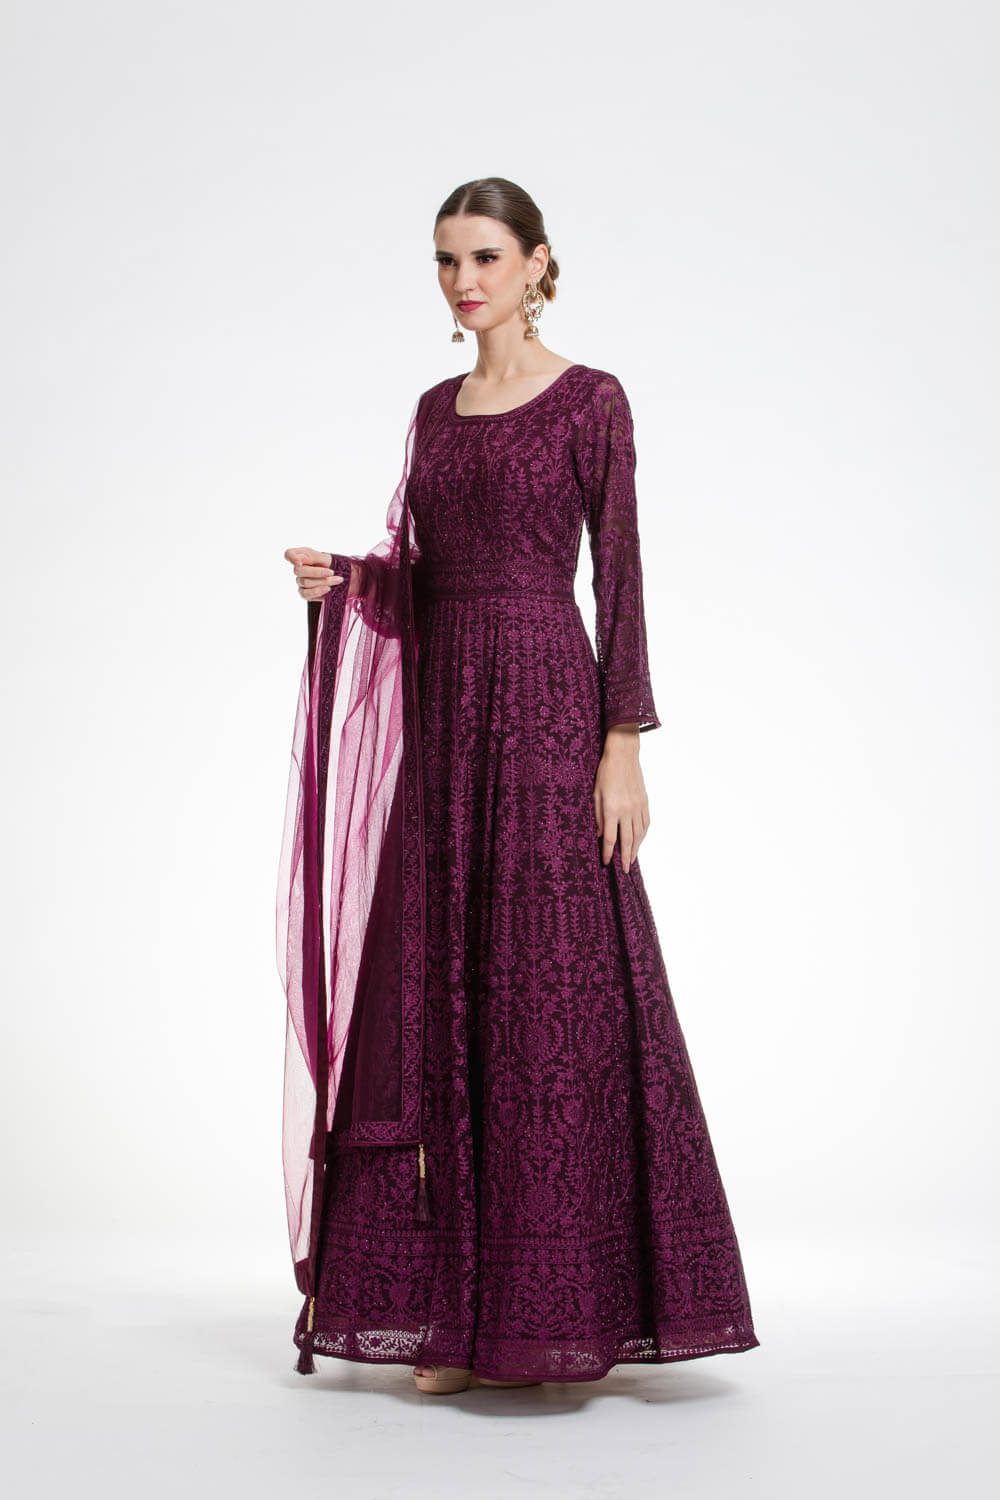 ANARKALI GOWN WITH DUPATTA - Stylemart